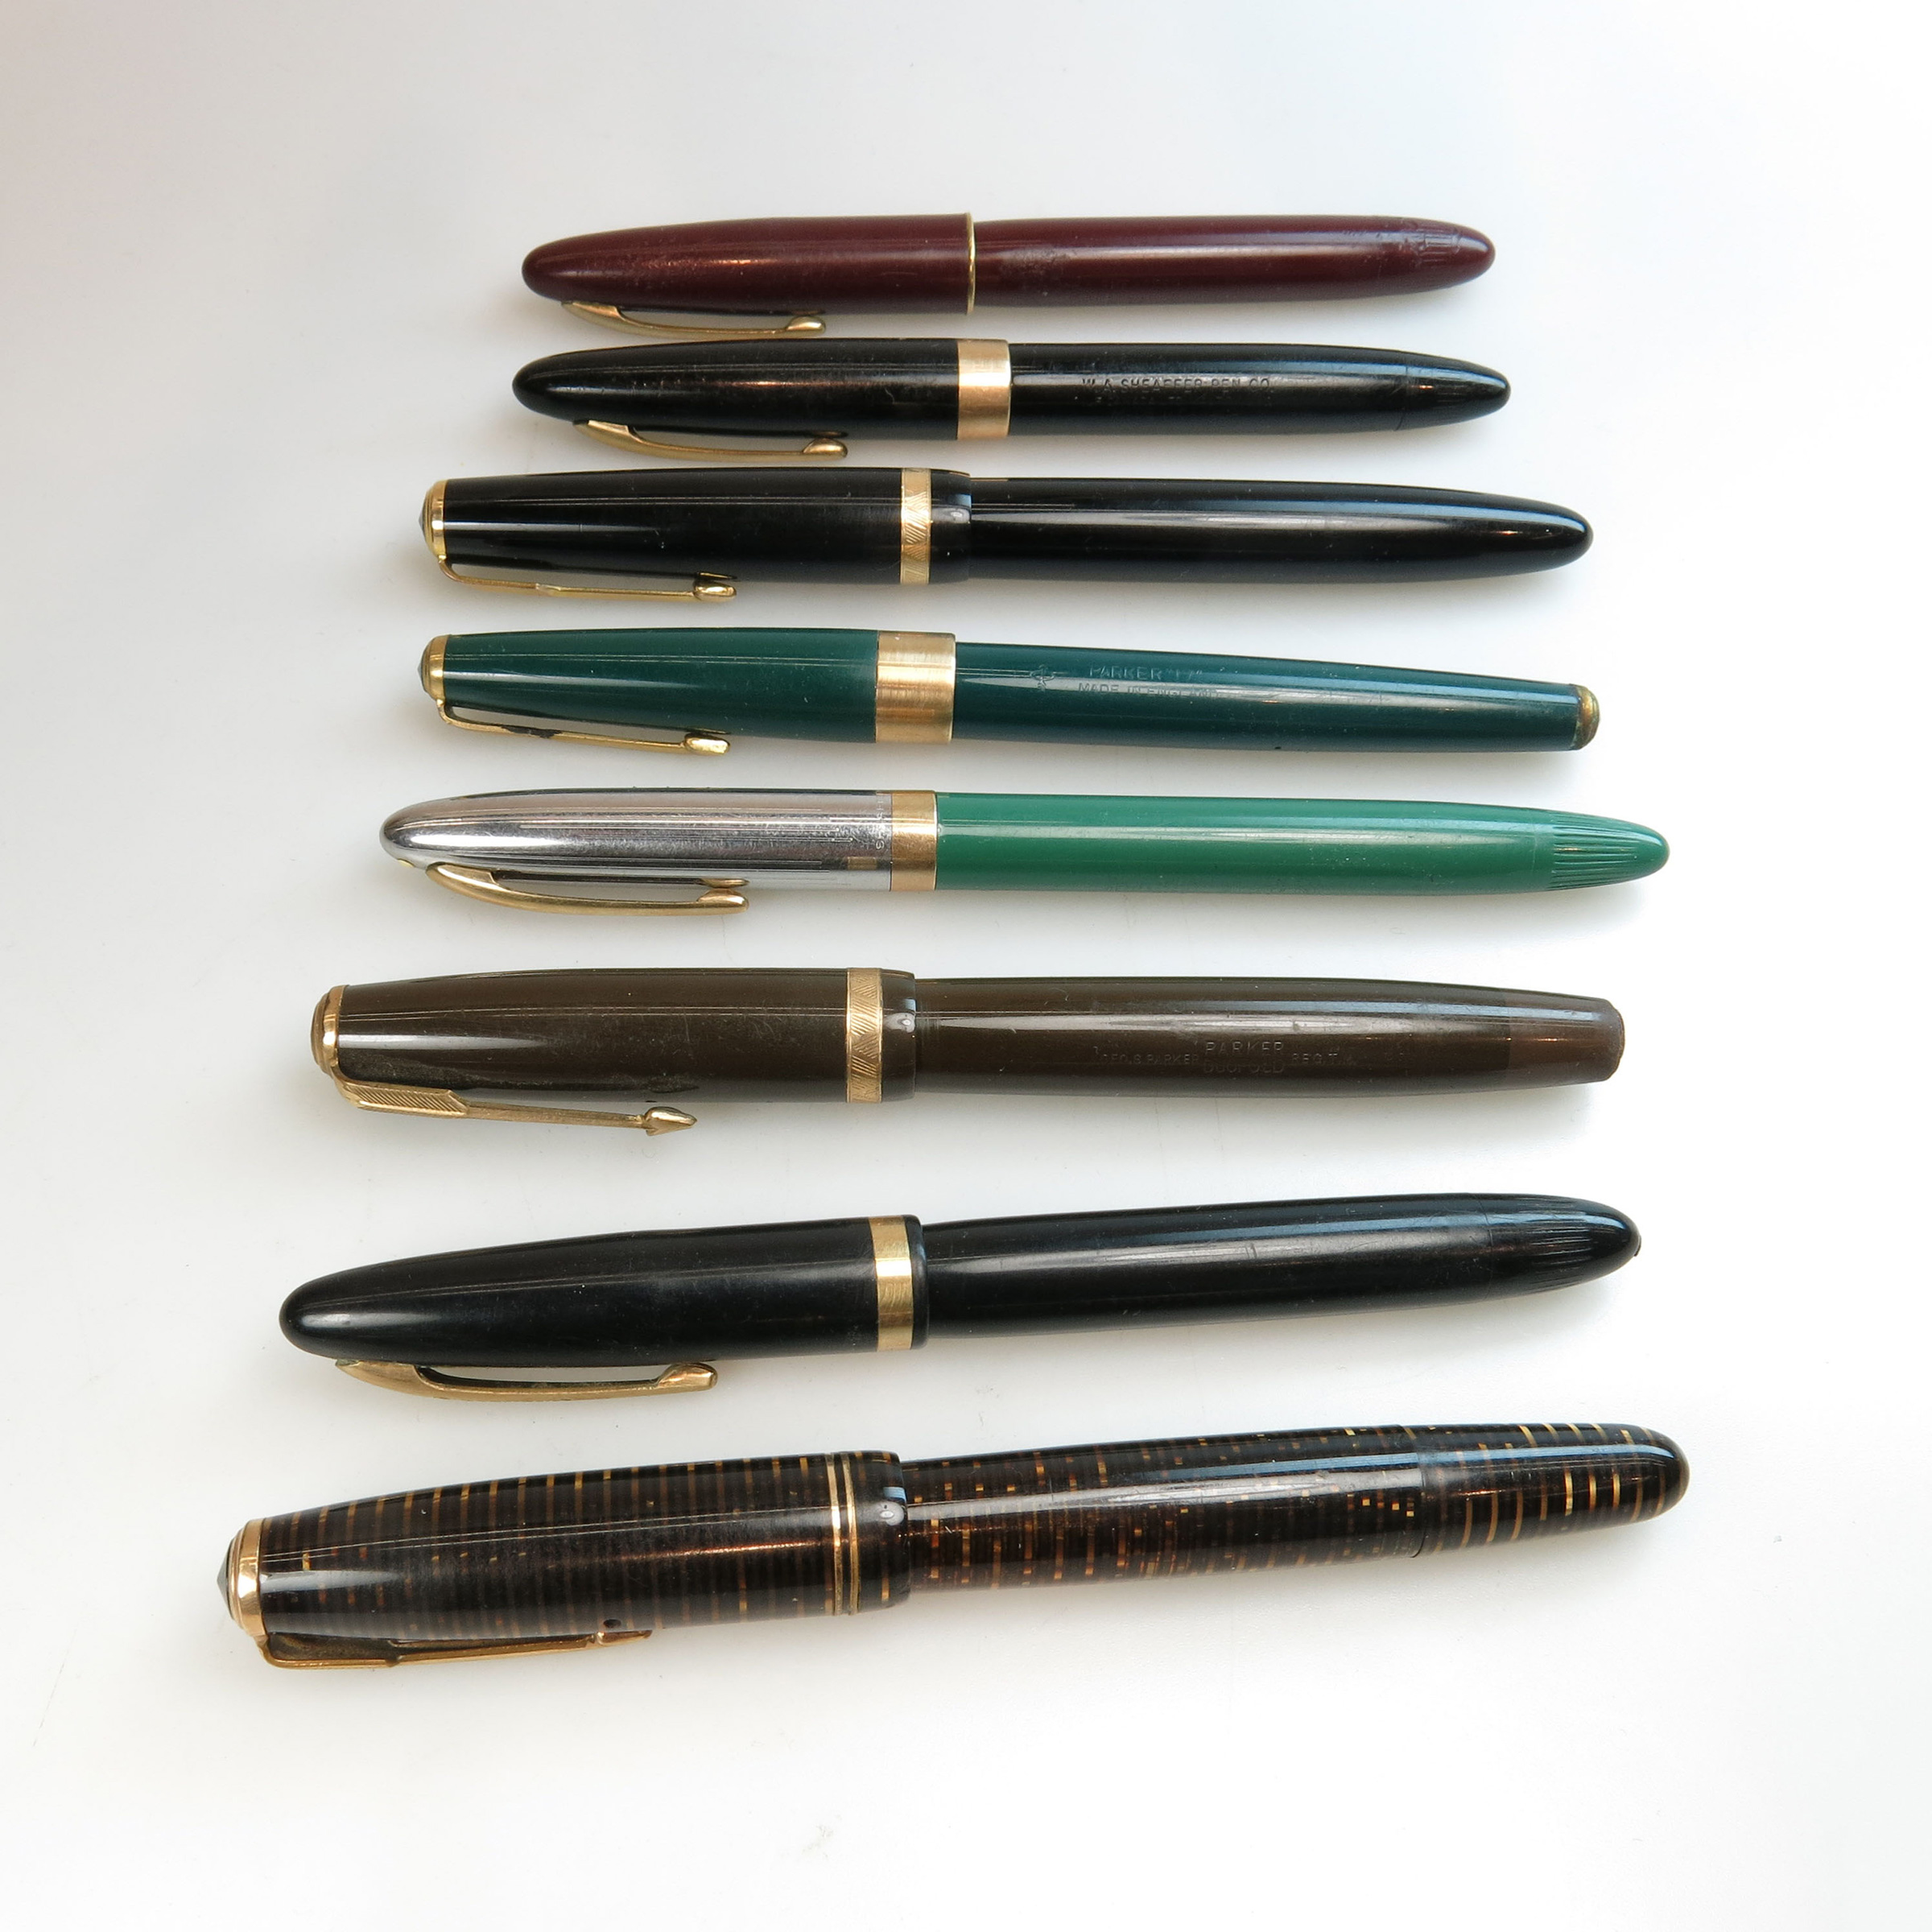 4 Parker And 4 Sheaffer Fountain Pens